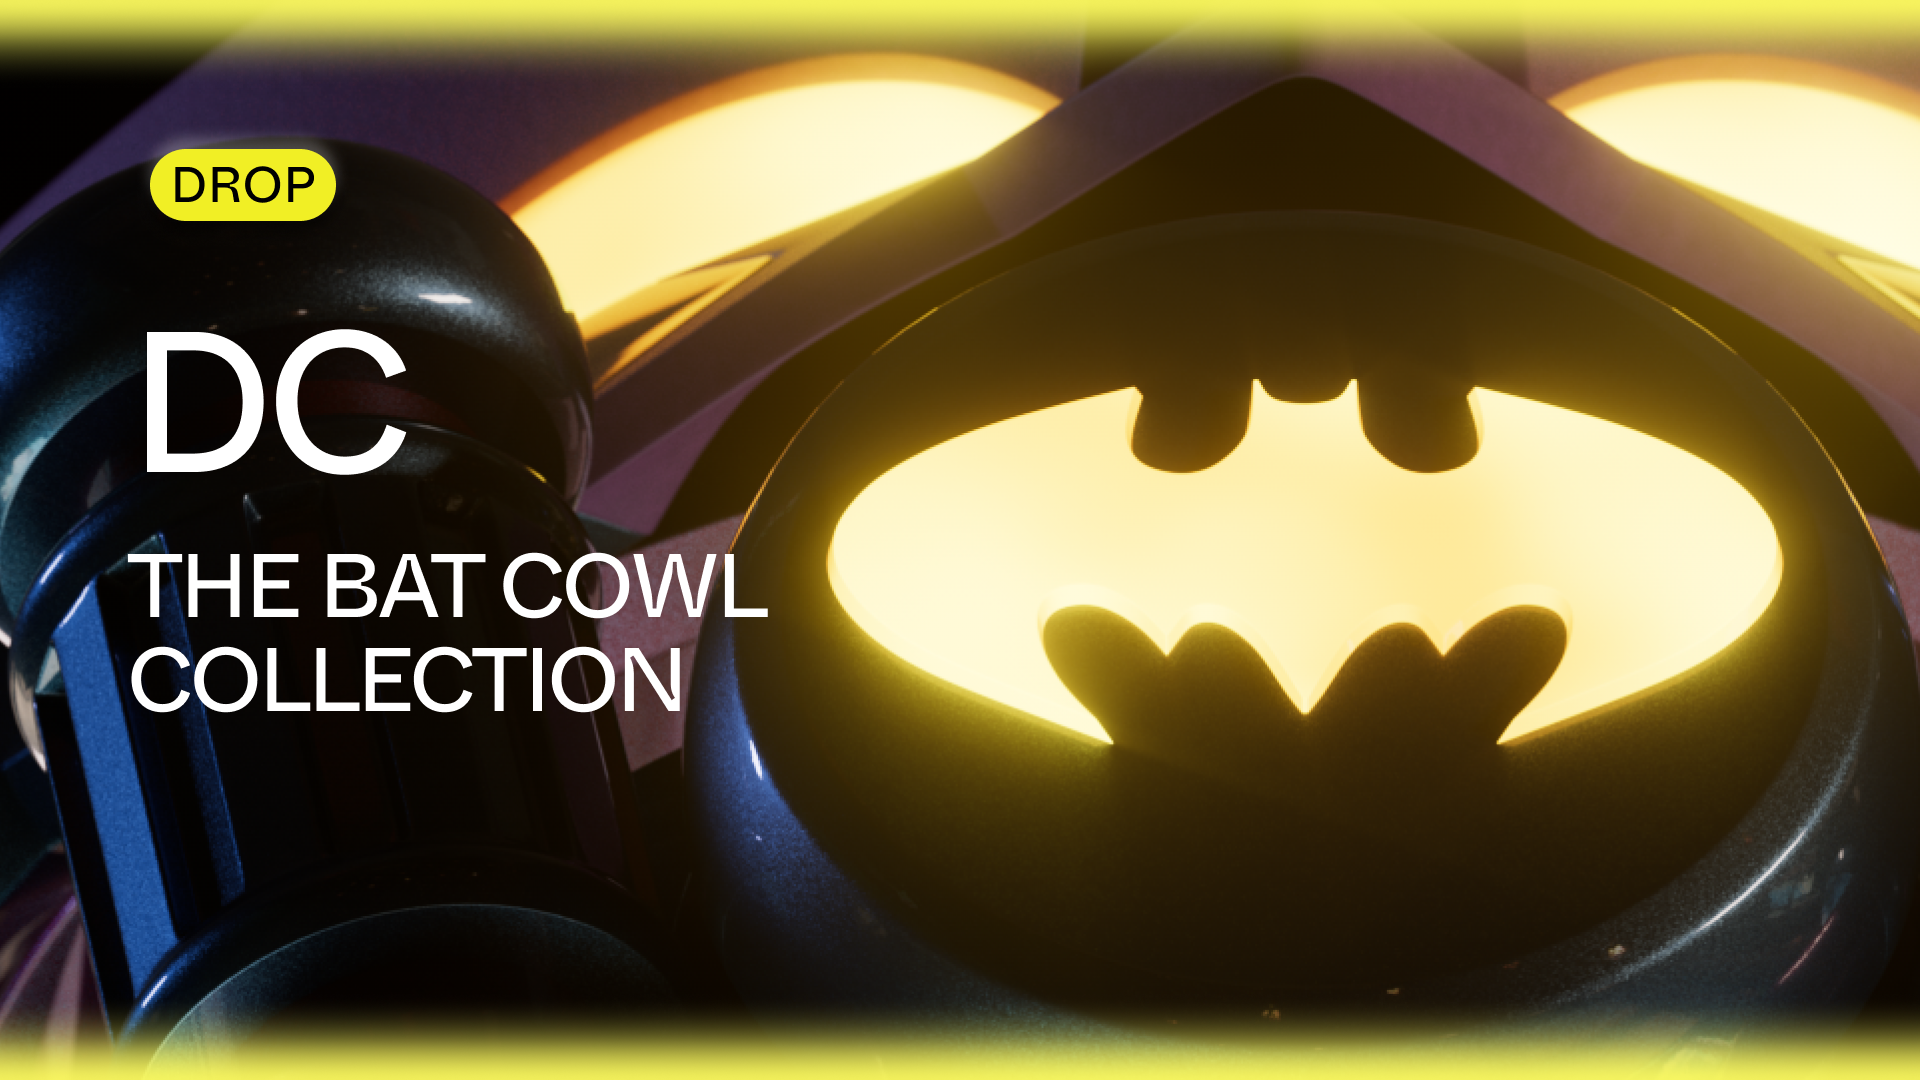 Claim Your DC Bat Cowl. Create Your Legacy.